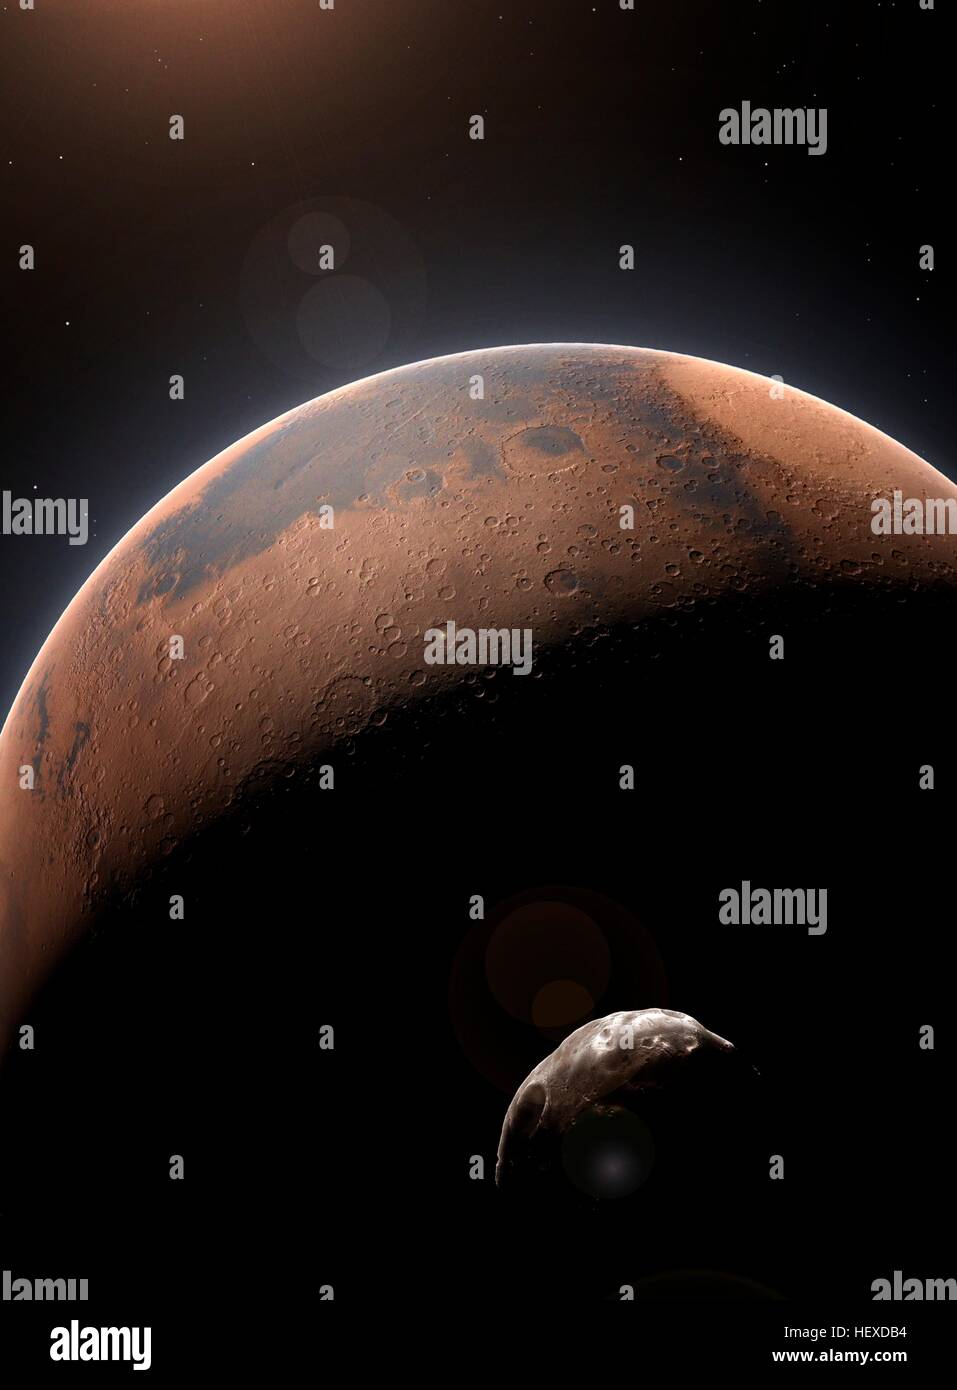 An impression of the Red Planet, Mars, the second smallest planet in the Solar System (after Mercury). Its innermost moon, Phobos, is seen in the foreground. Stock Photo